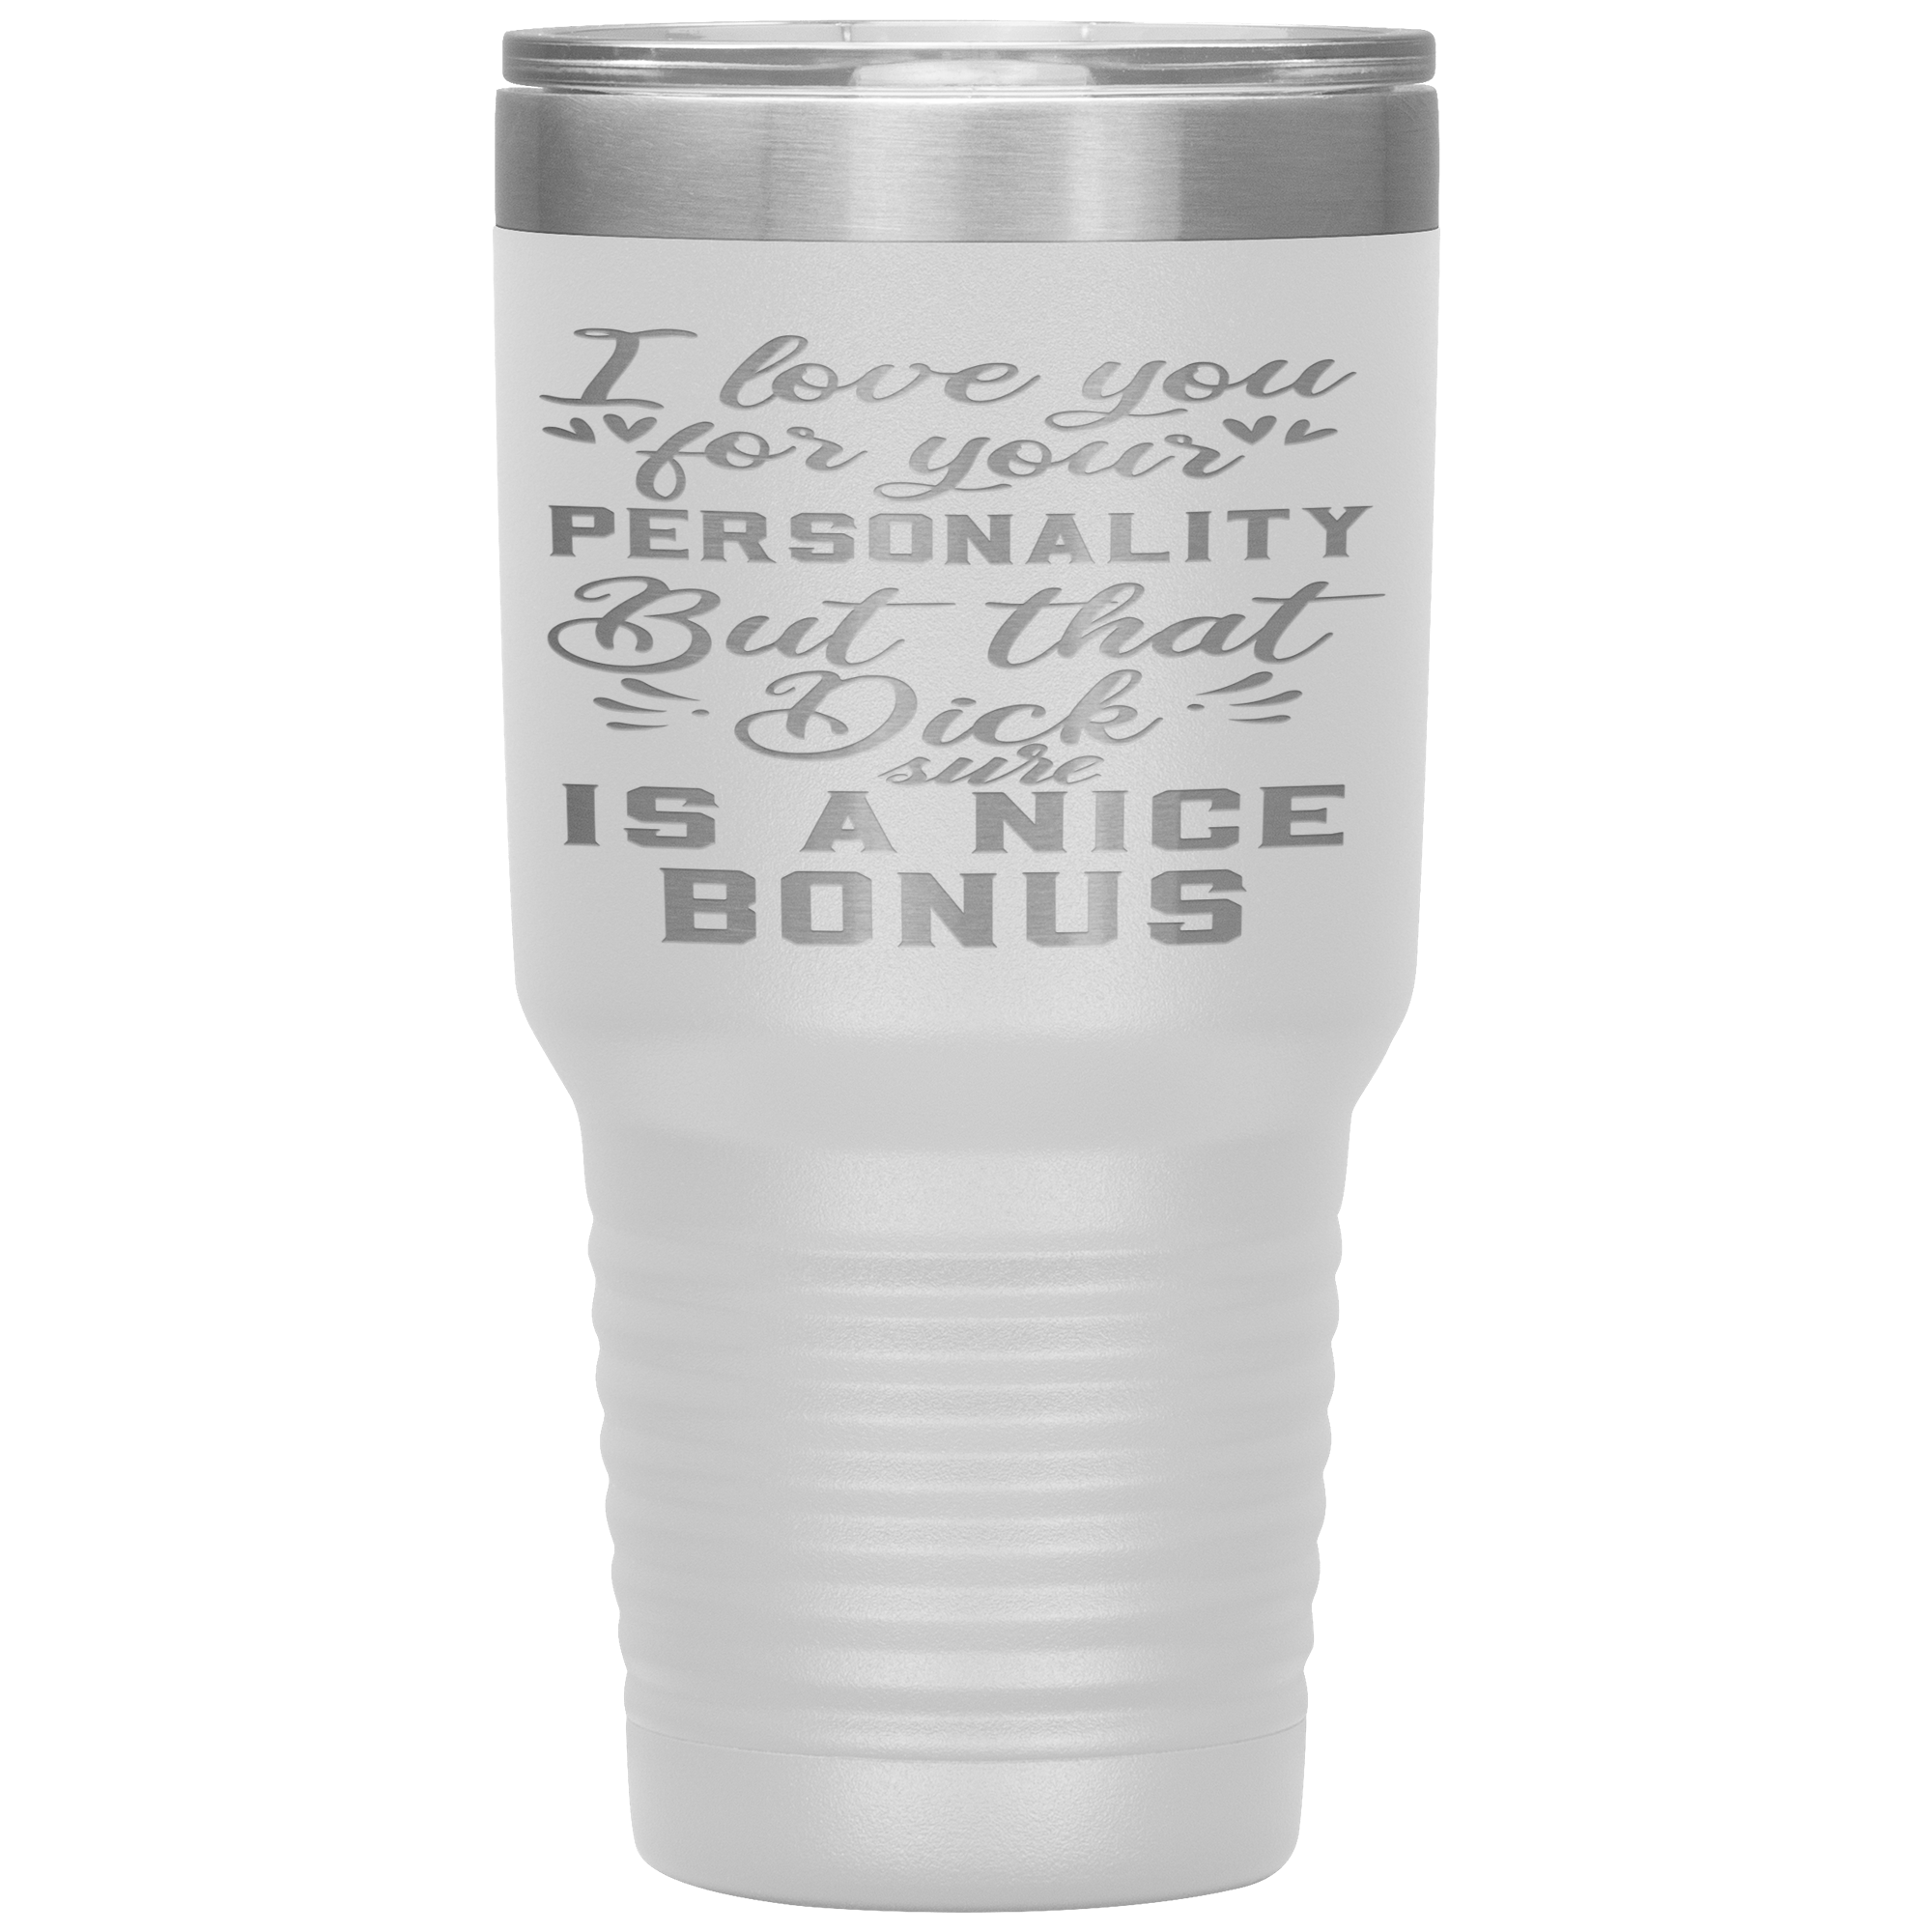 LOVE YOUR PERSONALITY BUT THE BONUS IS YOUR DICK - TUMBLER